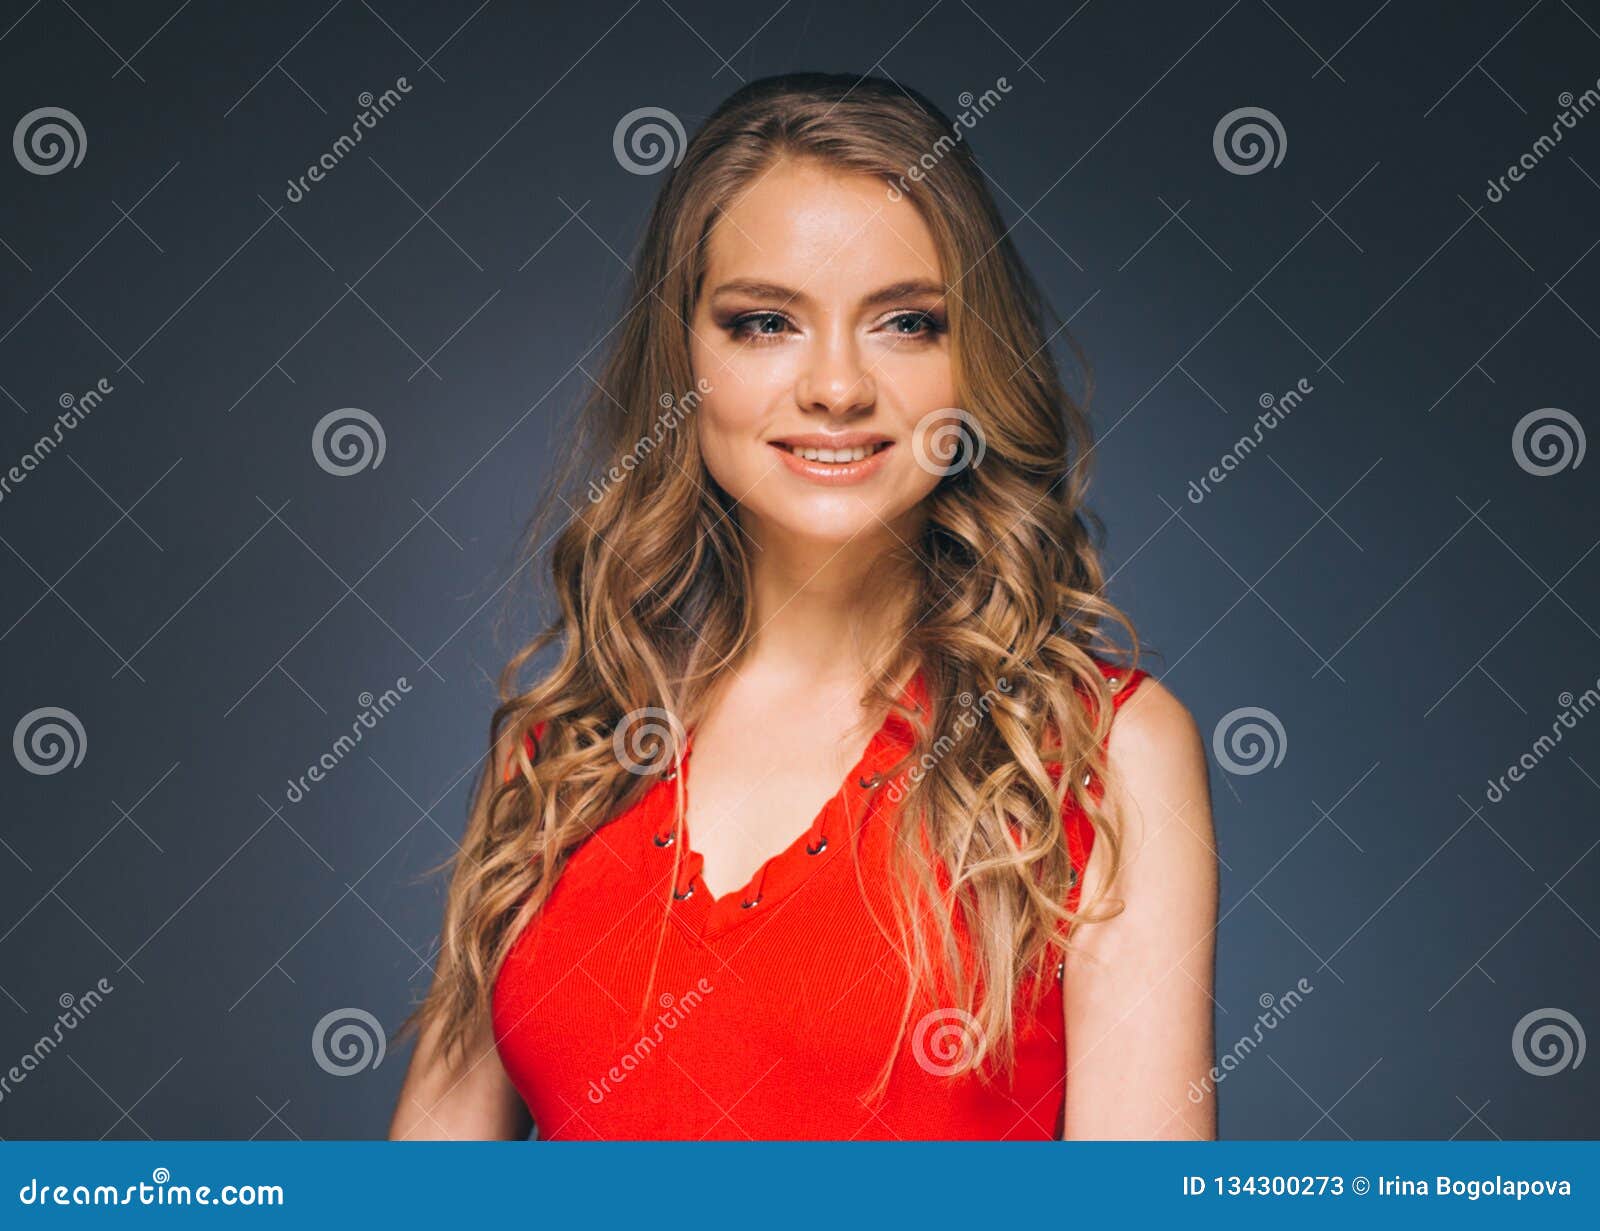 Woman in Red Dress with Long Blonde Hair Stock Image - Image of dark ...